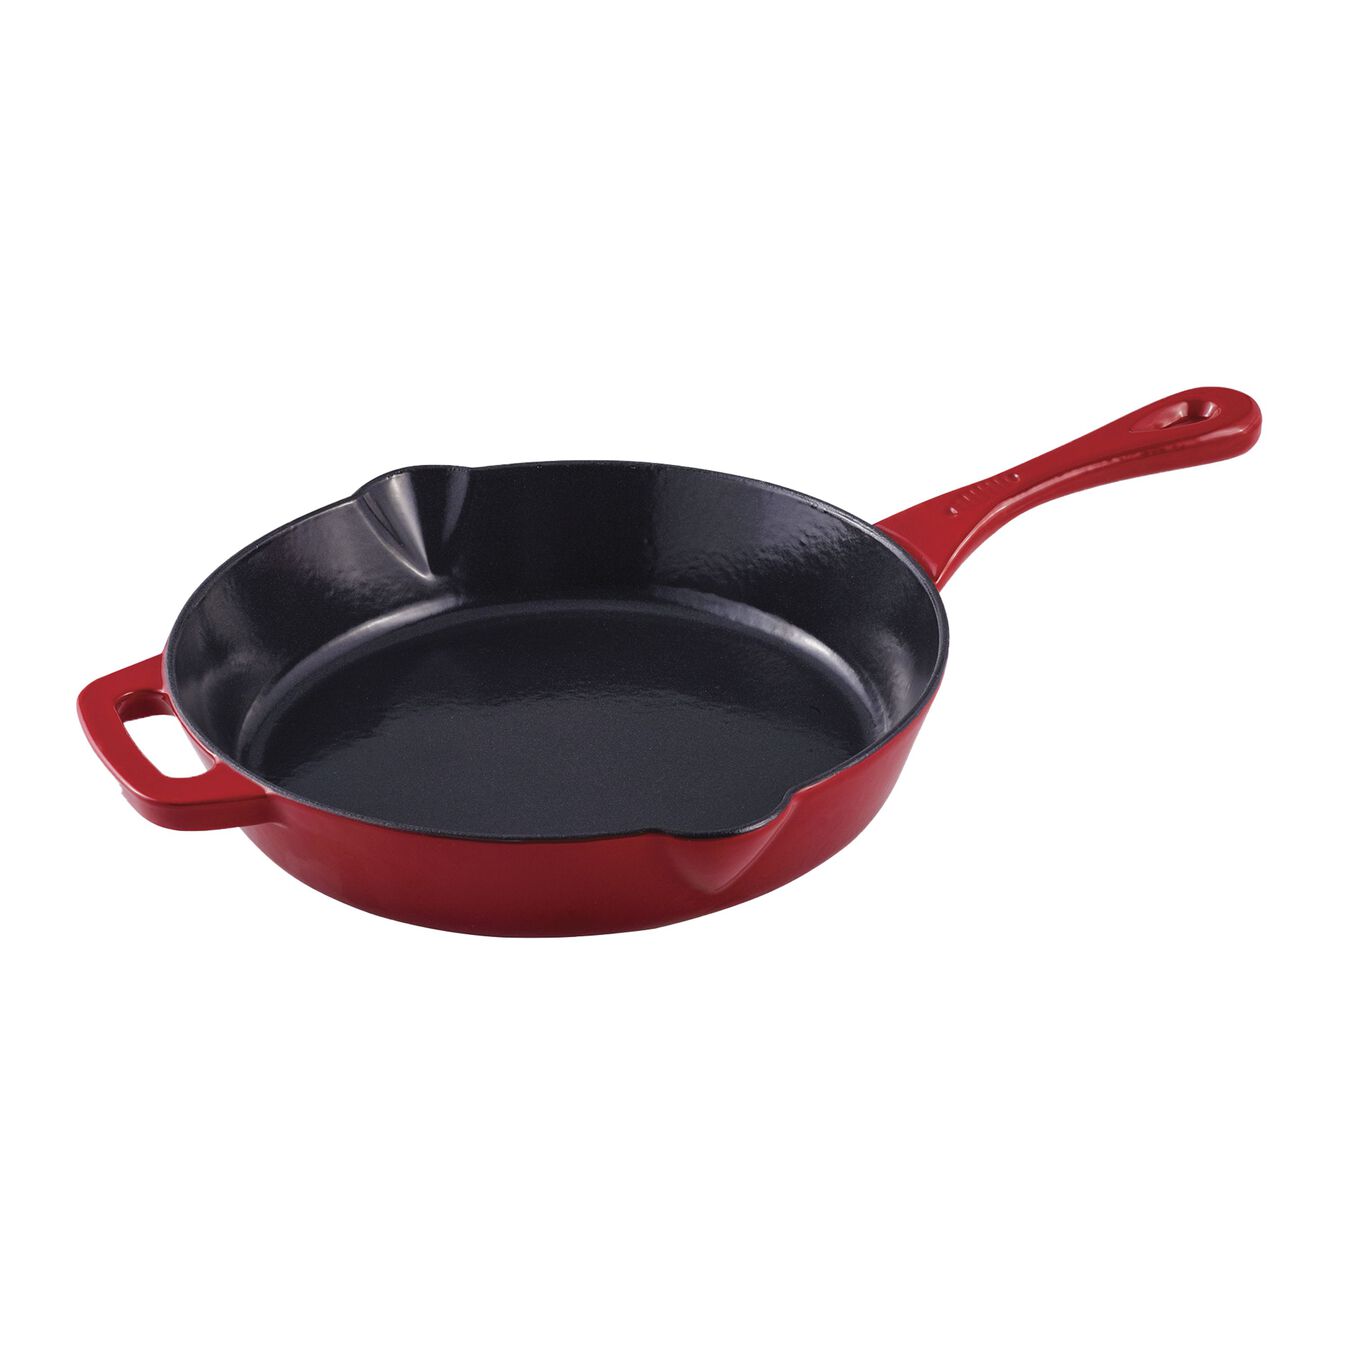 26 cm / 10 inch cast iron Frying pan,,large 1